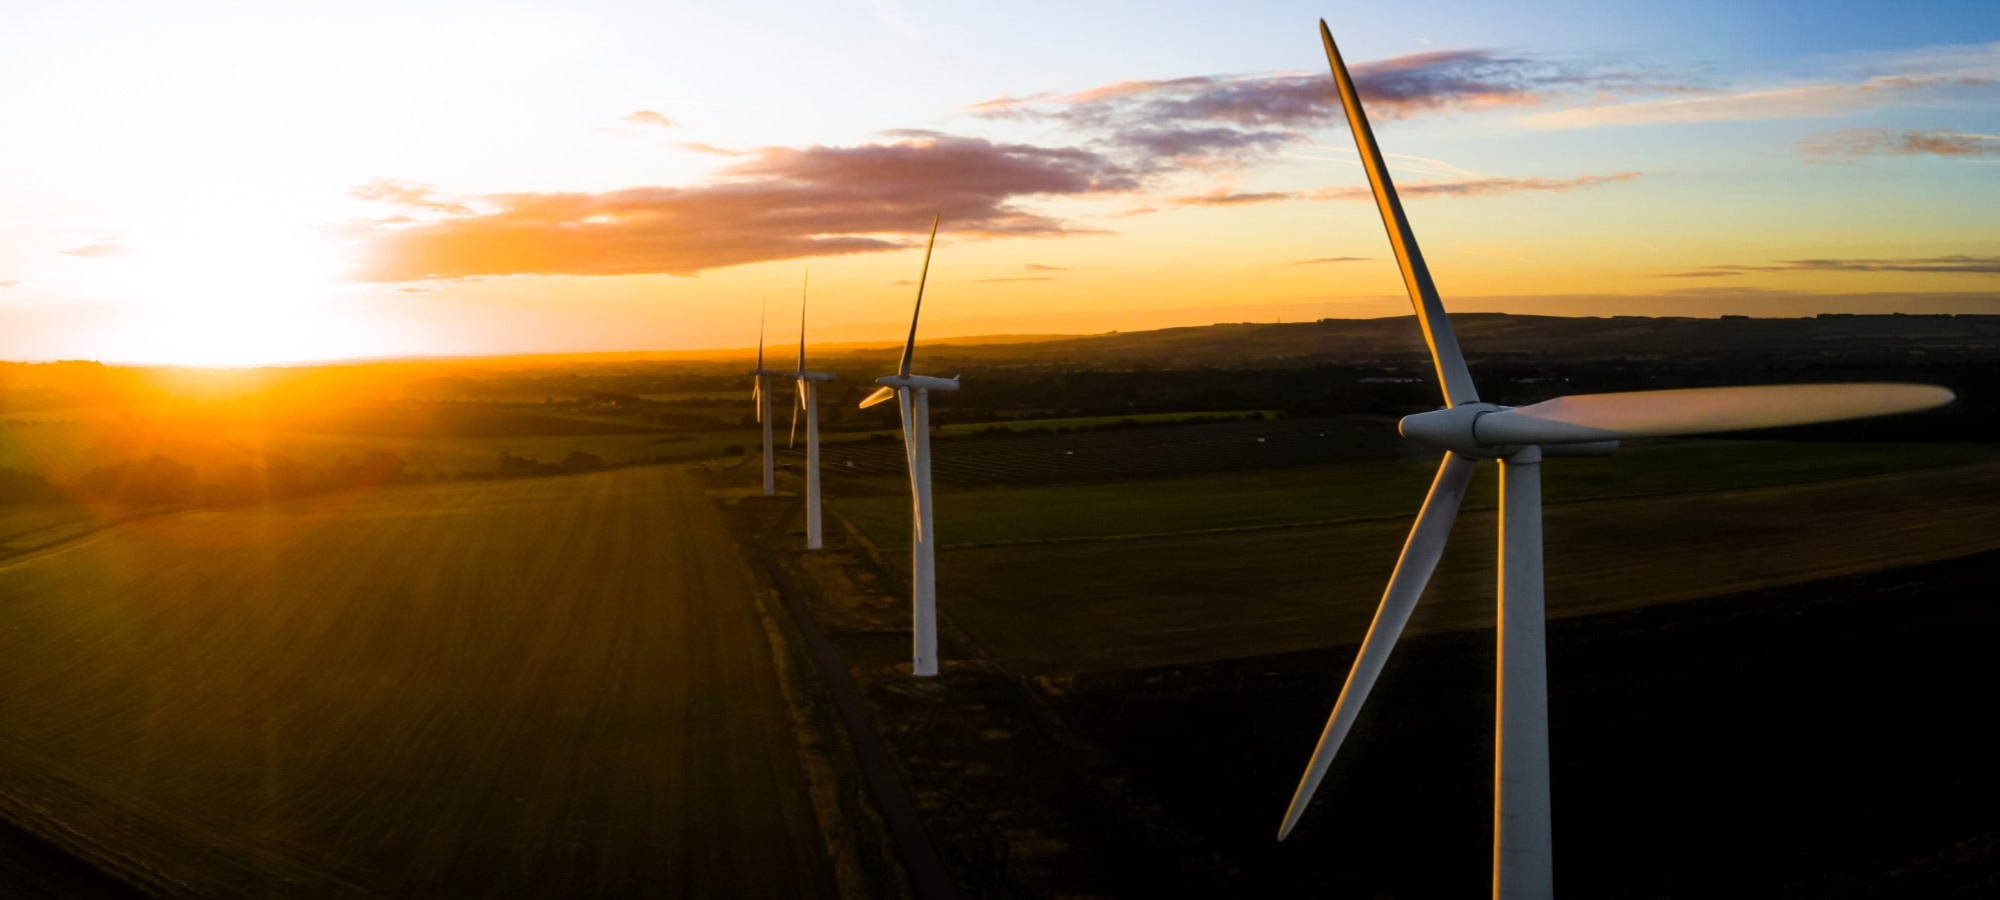 onshore wind farm background with clouds and sunset ersg